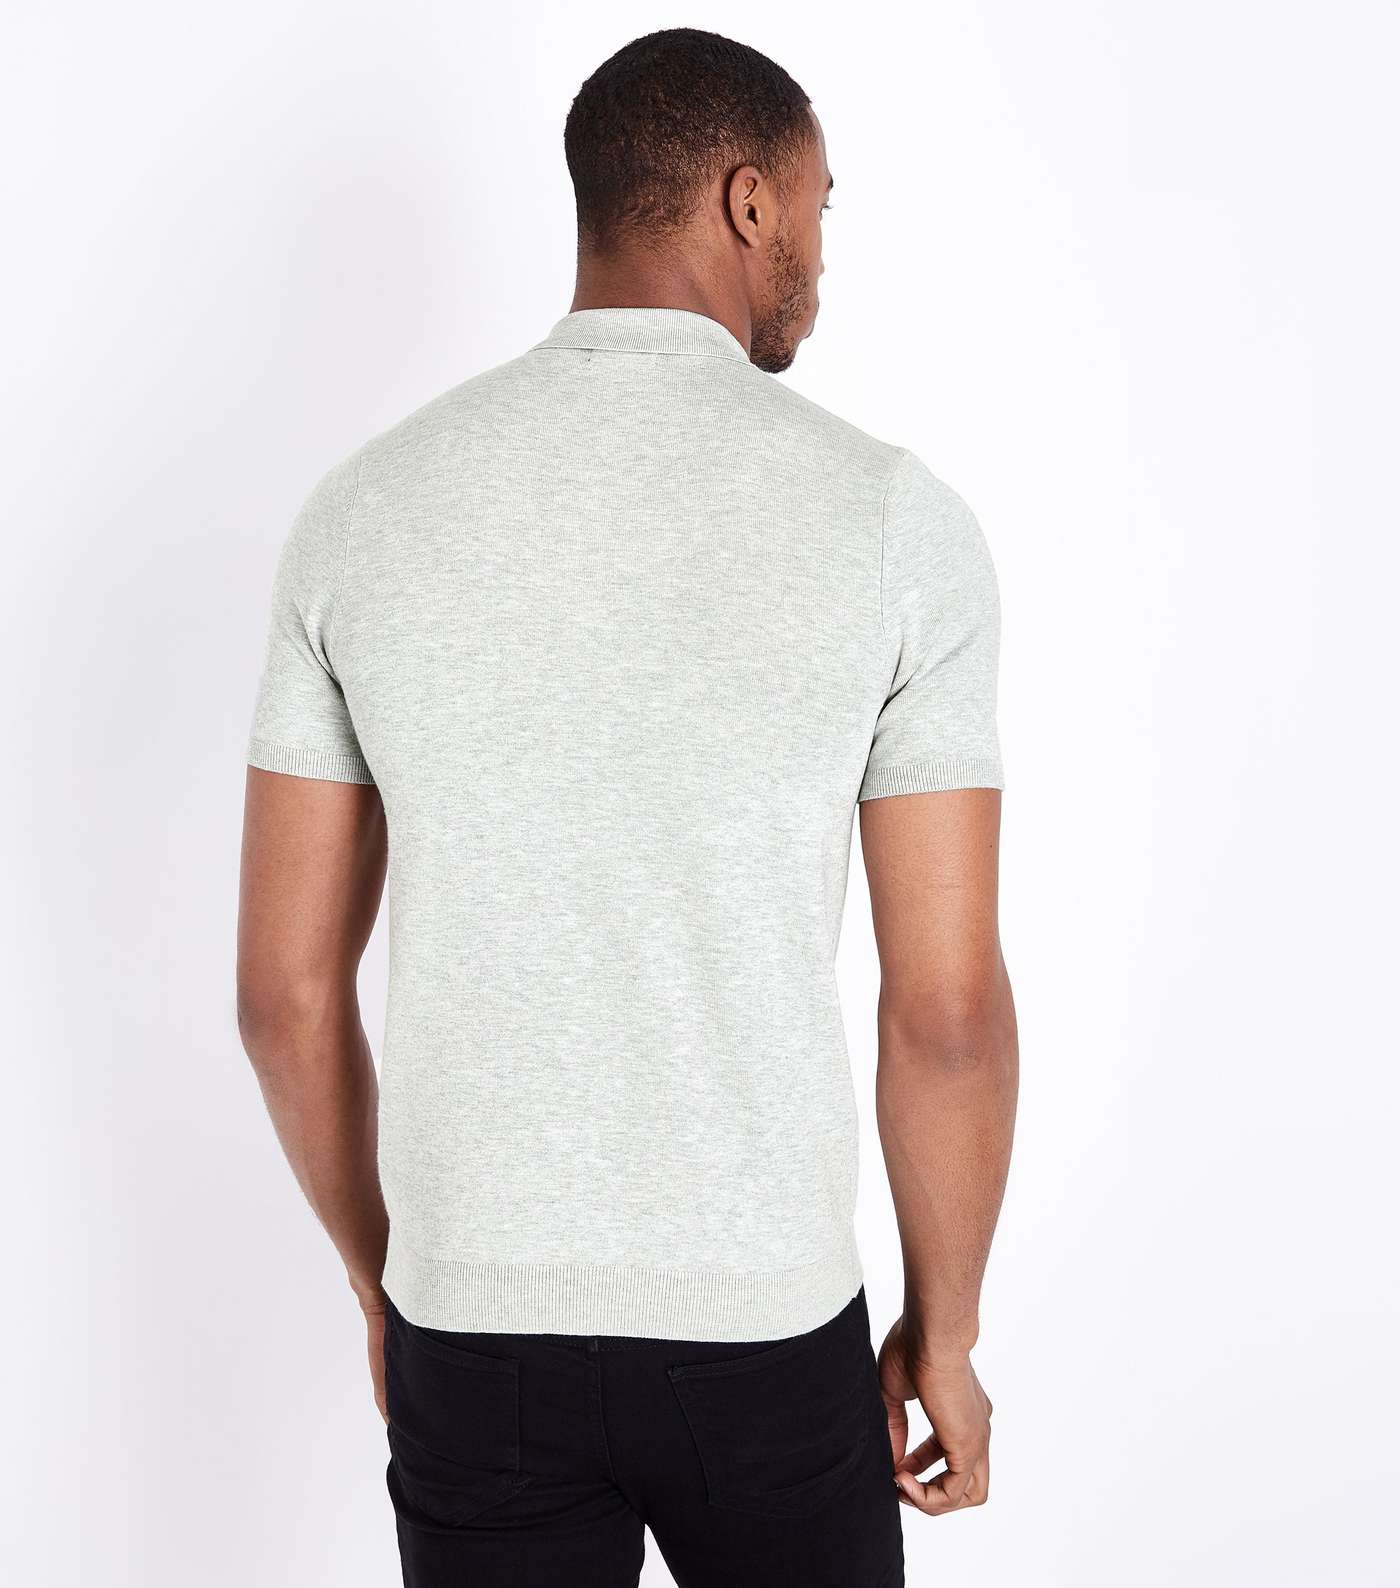 Grey Knit Muscle Fit Polo Shirt Image 3